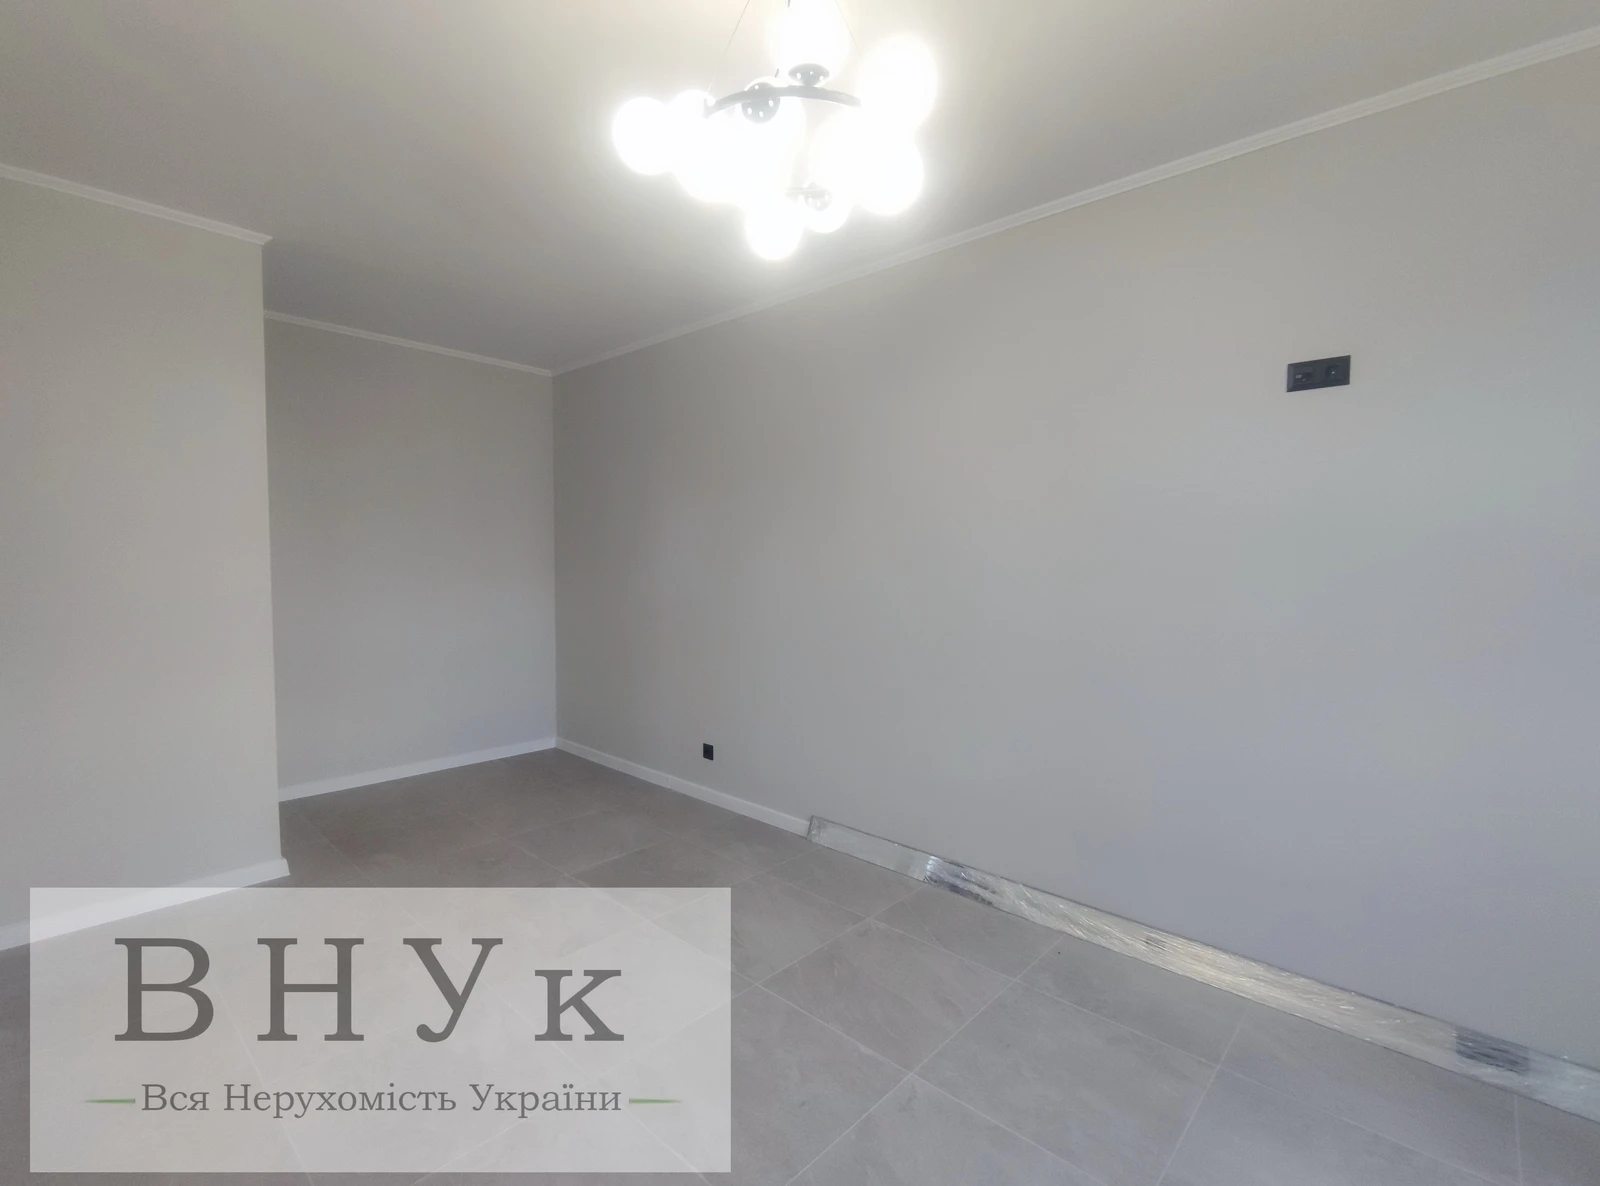 House for sale. 94 m², 1 floor. Sonyachna , Ternopil. 